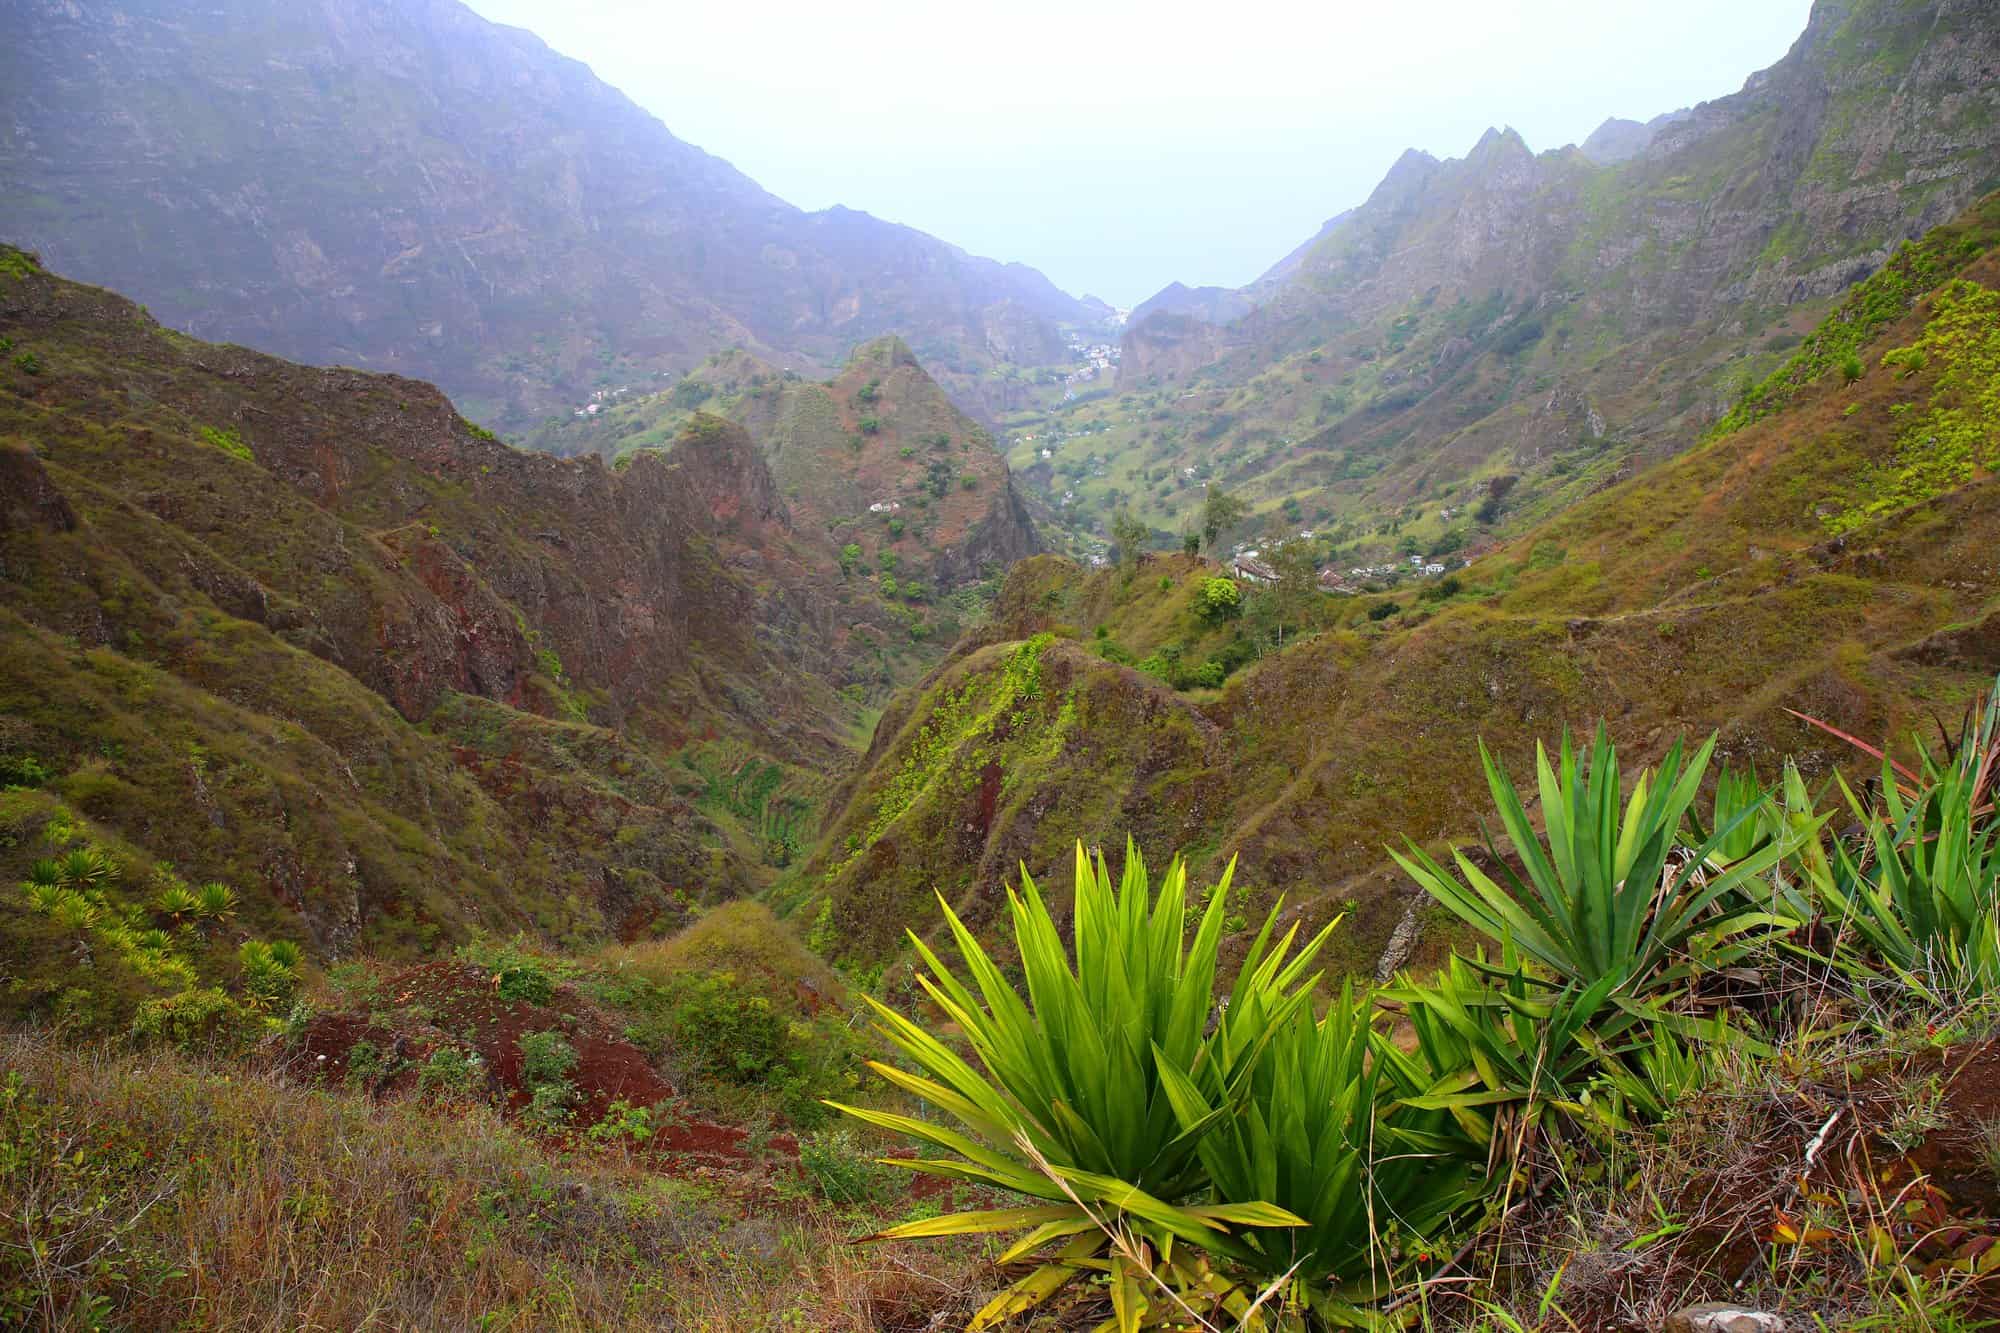 <p>On Santo Antão, I hiked through the verdant valleys and pastel villages in the island’s interior, overwhelmed by dramatic vistas at every turn. The Cape Verdean people’s warmth and relaxed vivacity give this place its soul.</p>